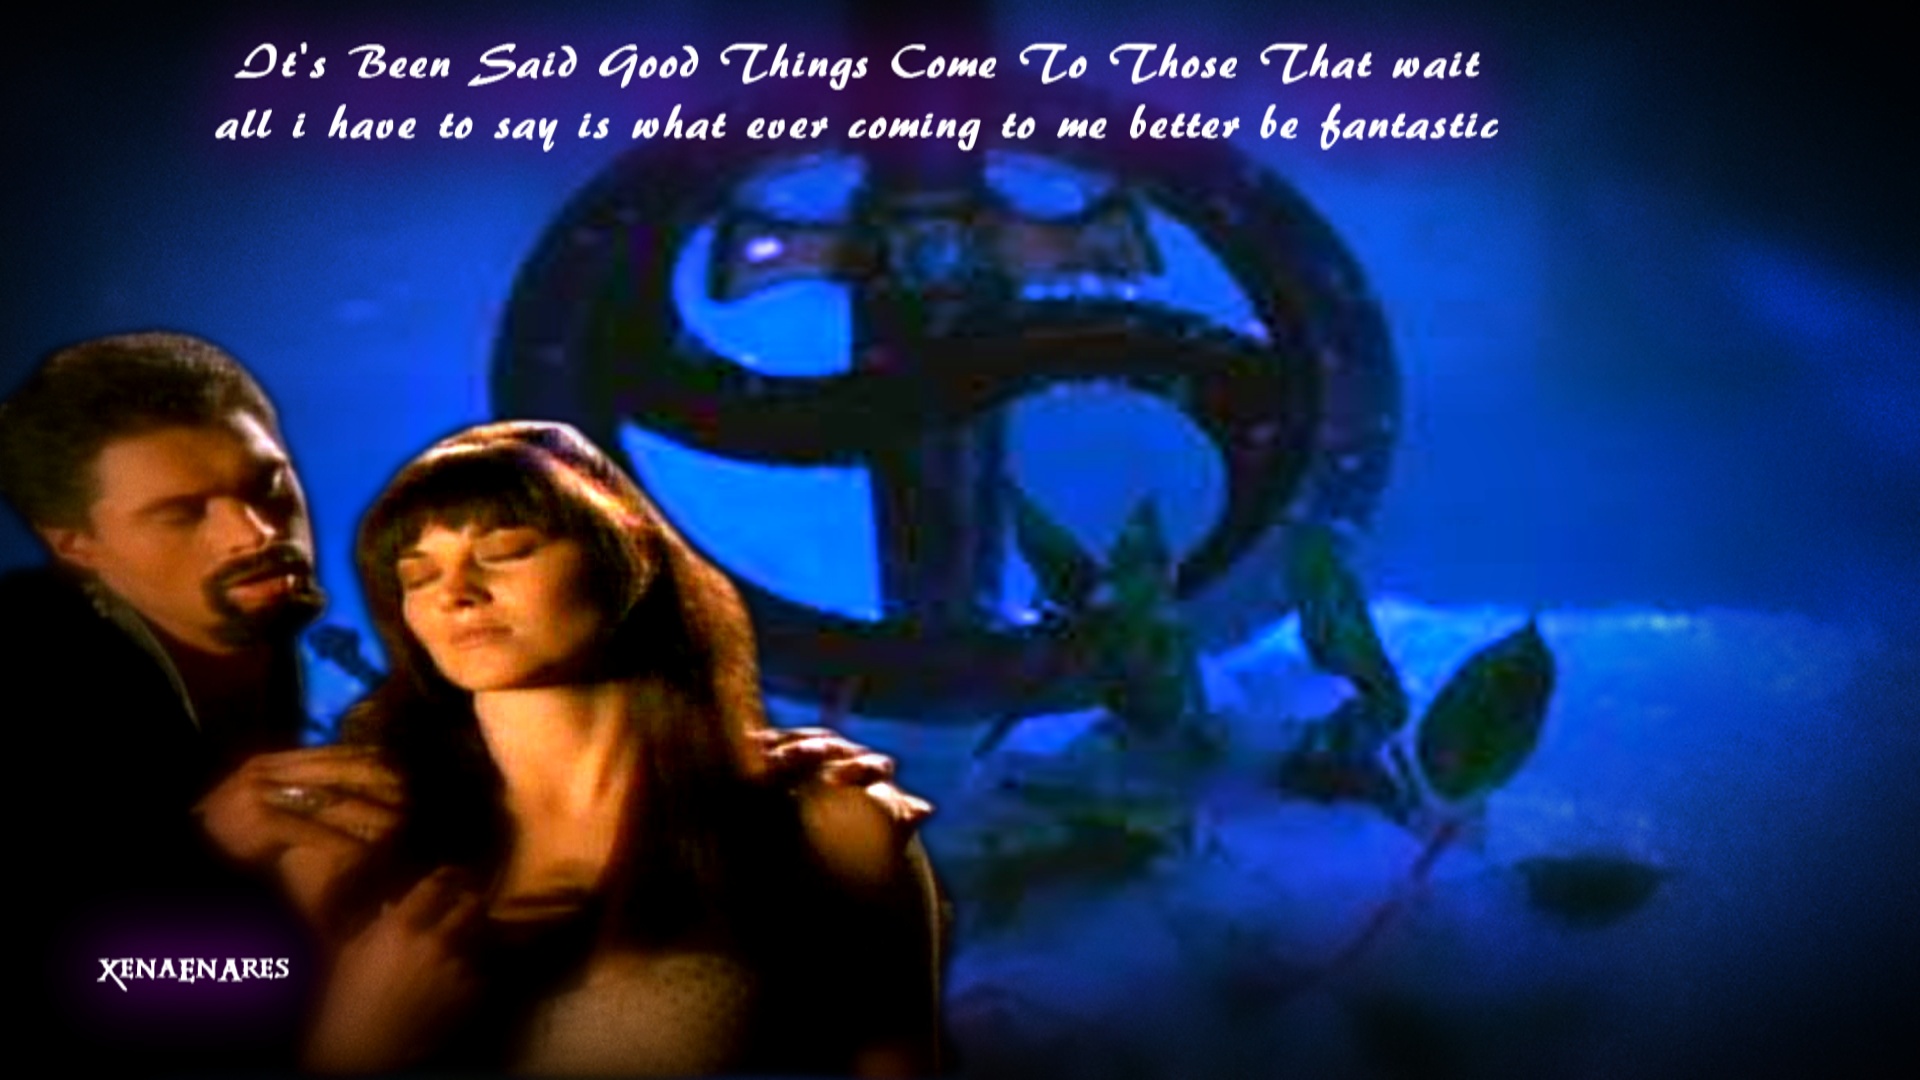 Love Never Ends - Xena & Ares Wallpaper (32663287) - Fanpop